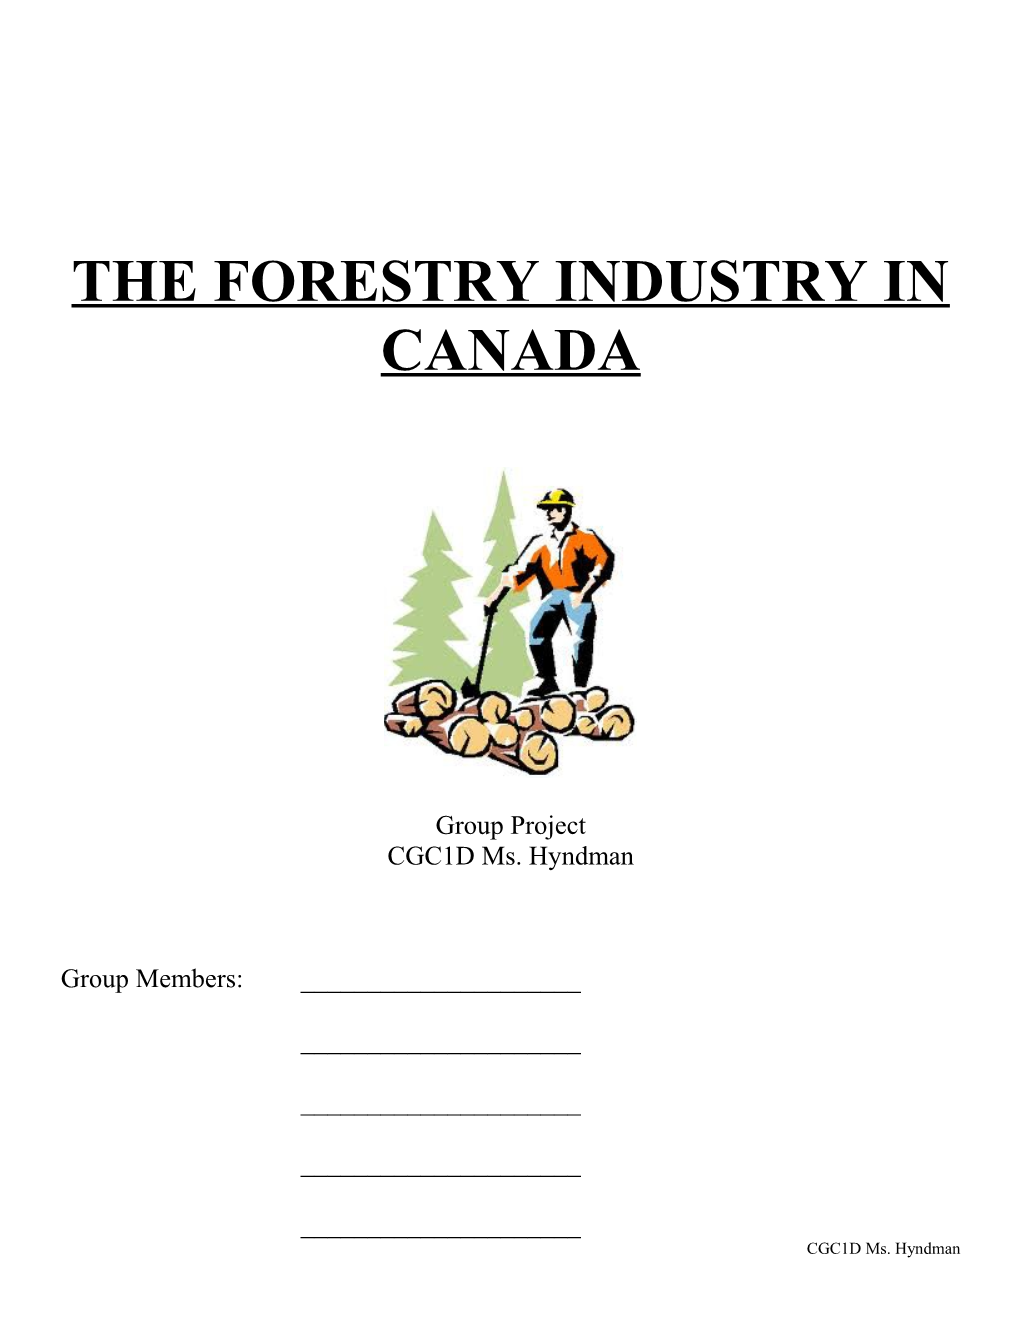 The Forestry Industry in Canada